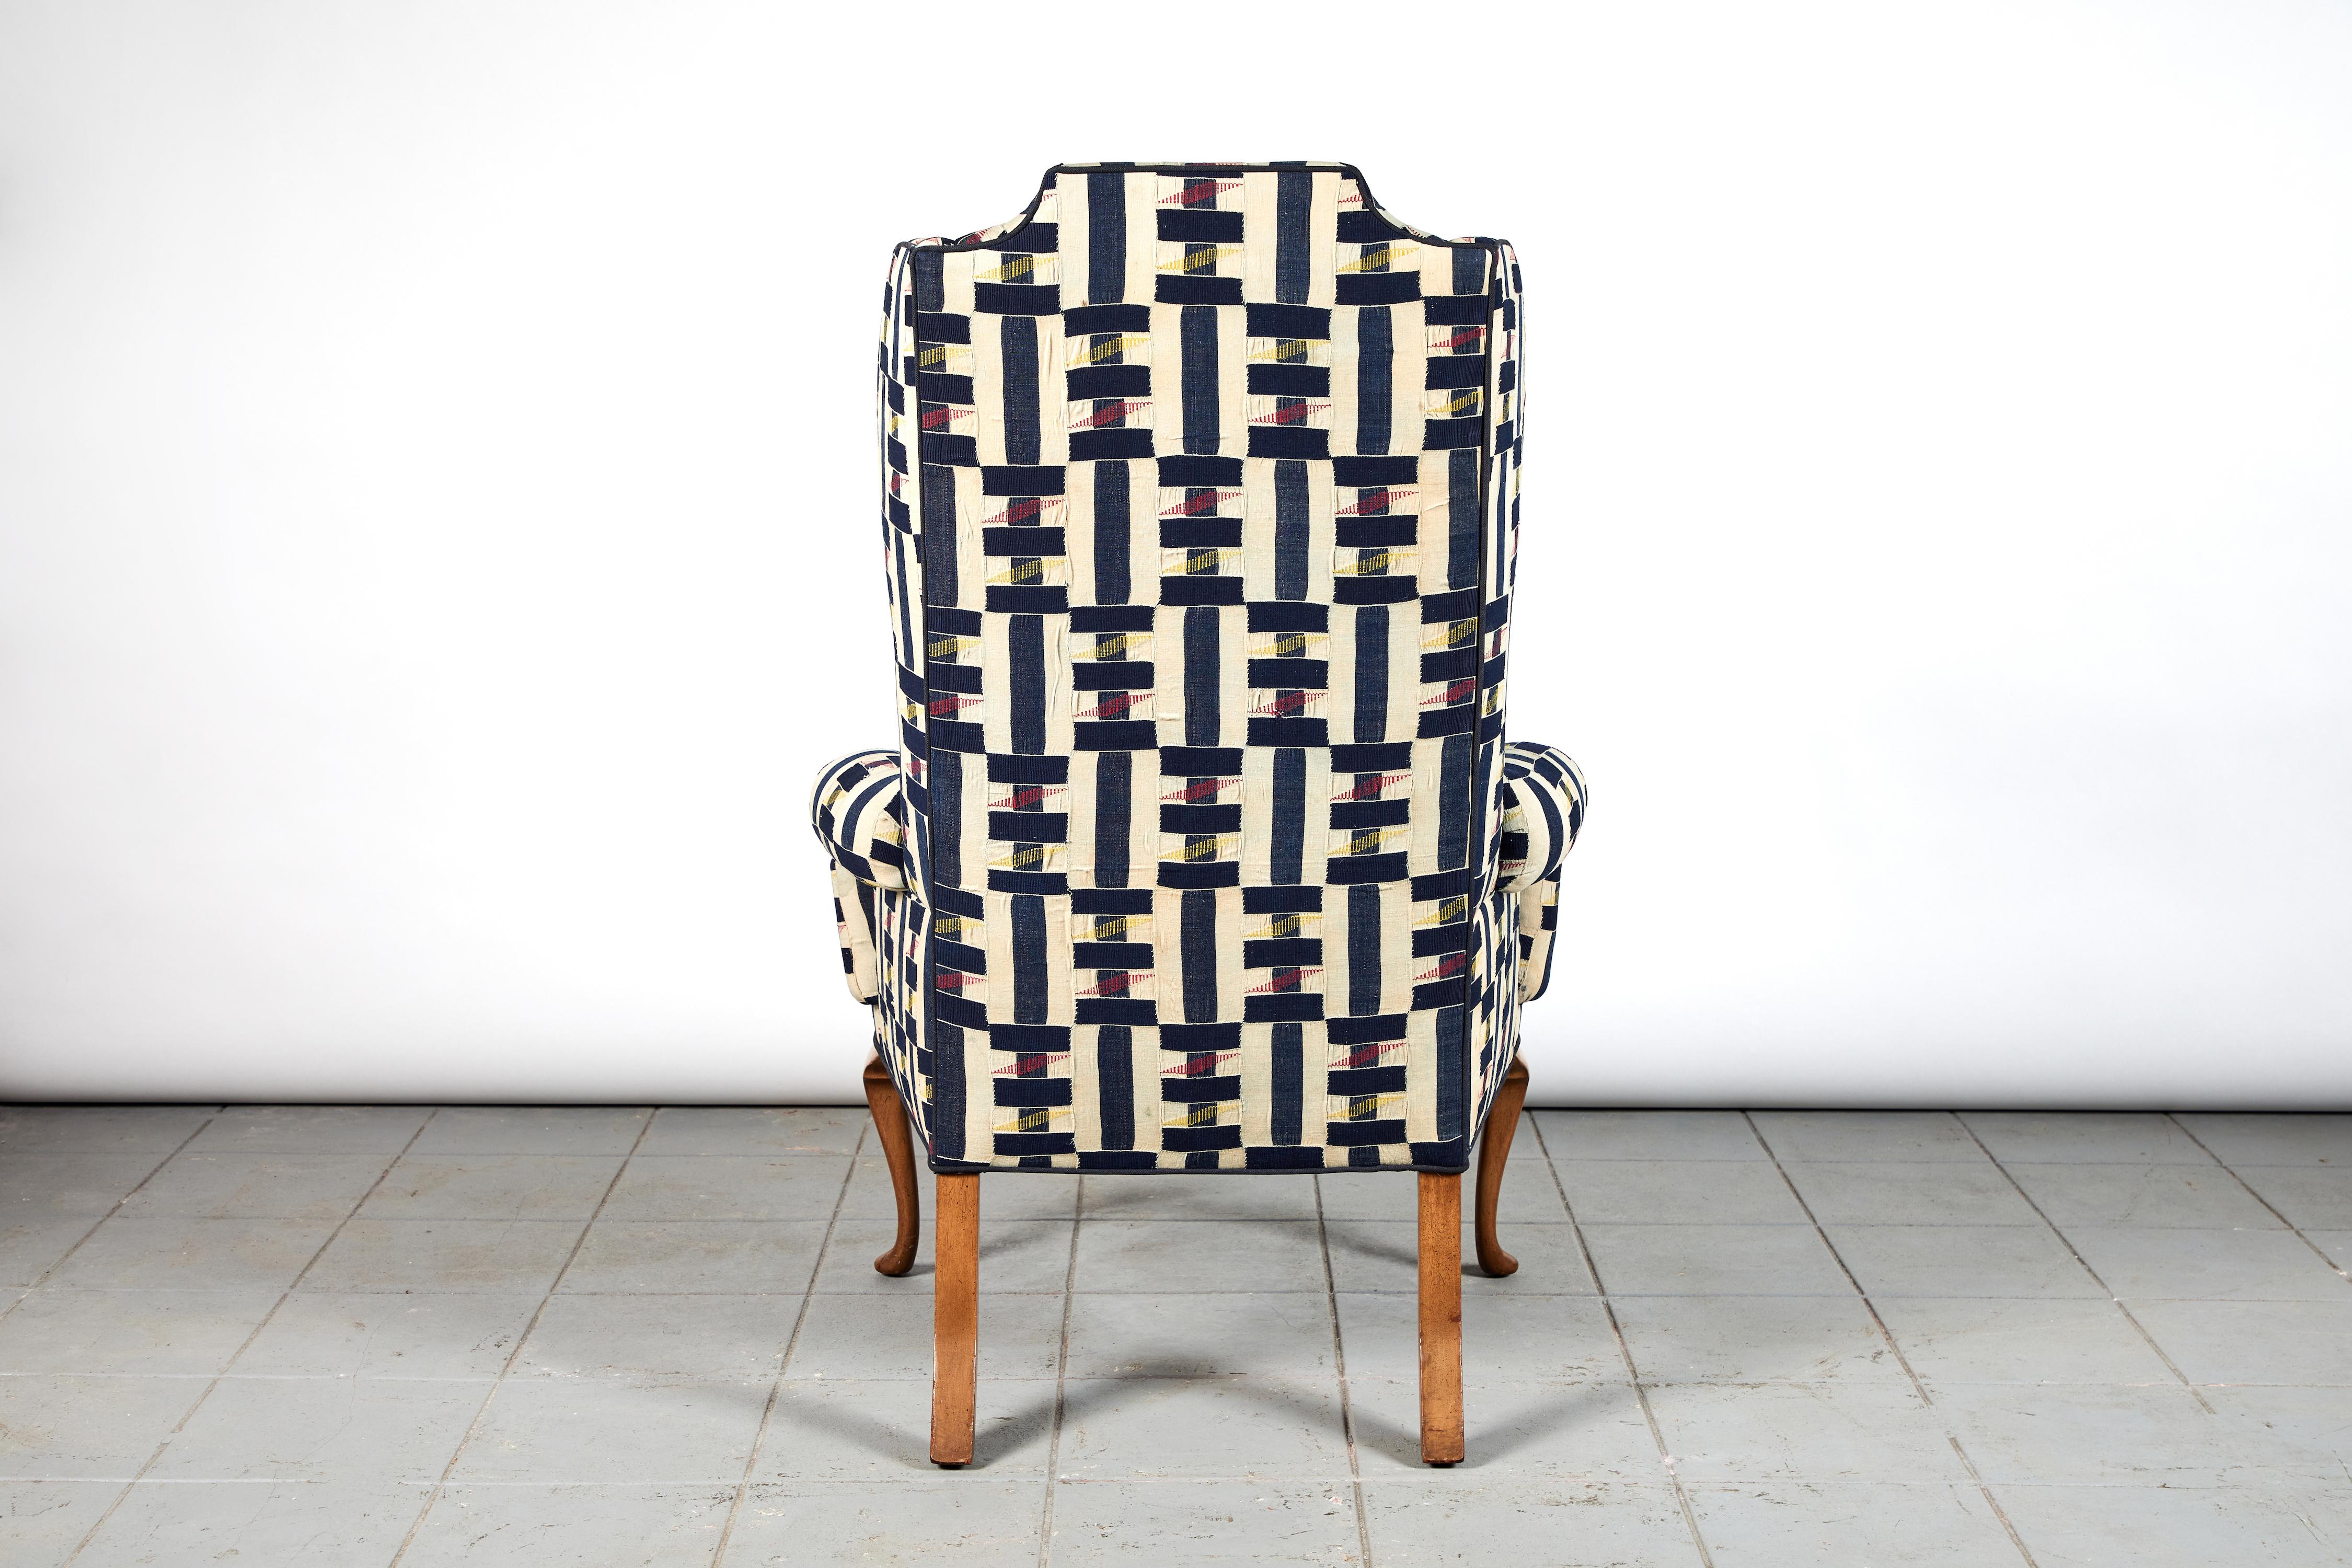 20th Century Vintage Wingback Chair in Multicolored Ewe Fabric from Ghana